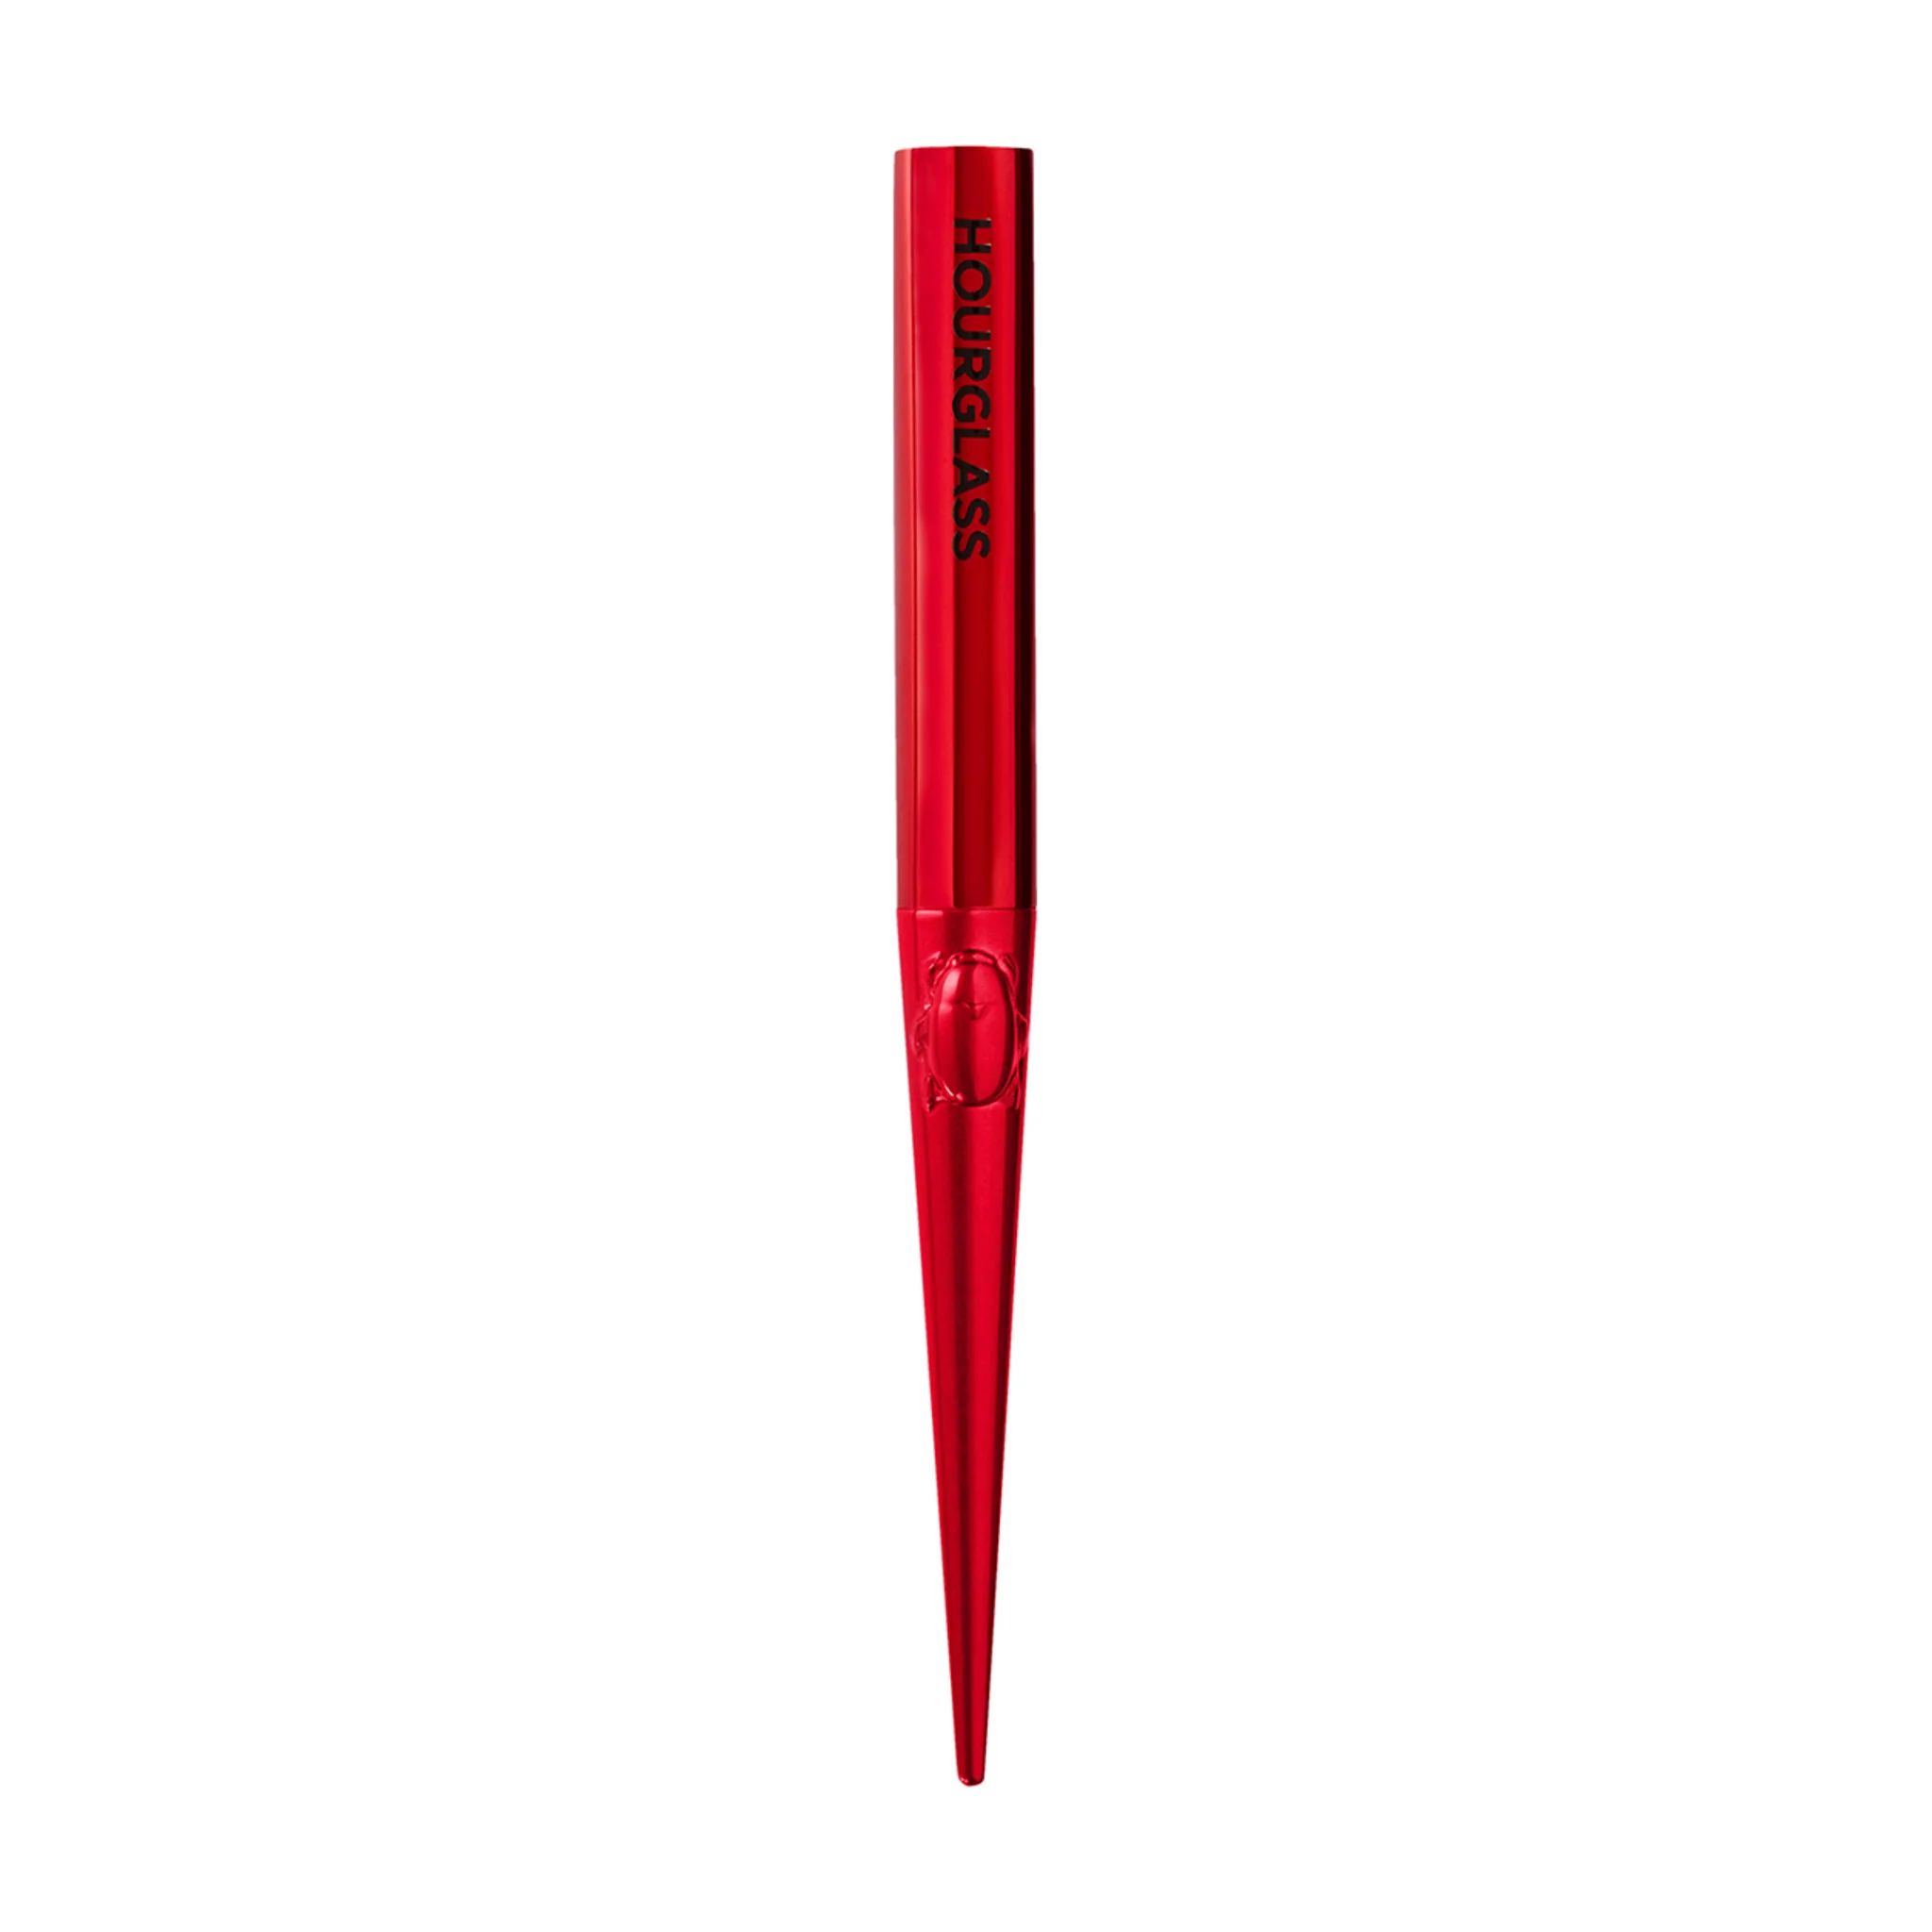 Confession™ Ultra Slim High Intensity Refillable Lipstick - Red 0 | Bluemercury, Inc.